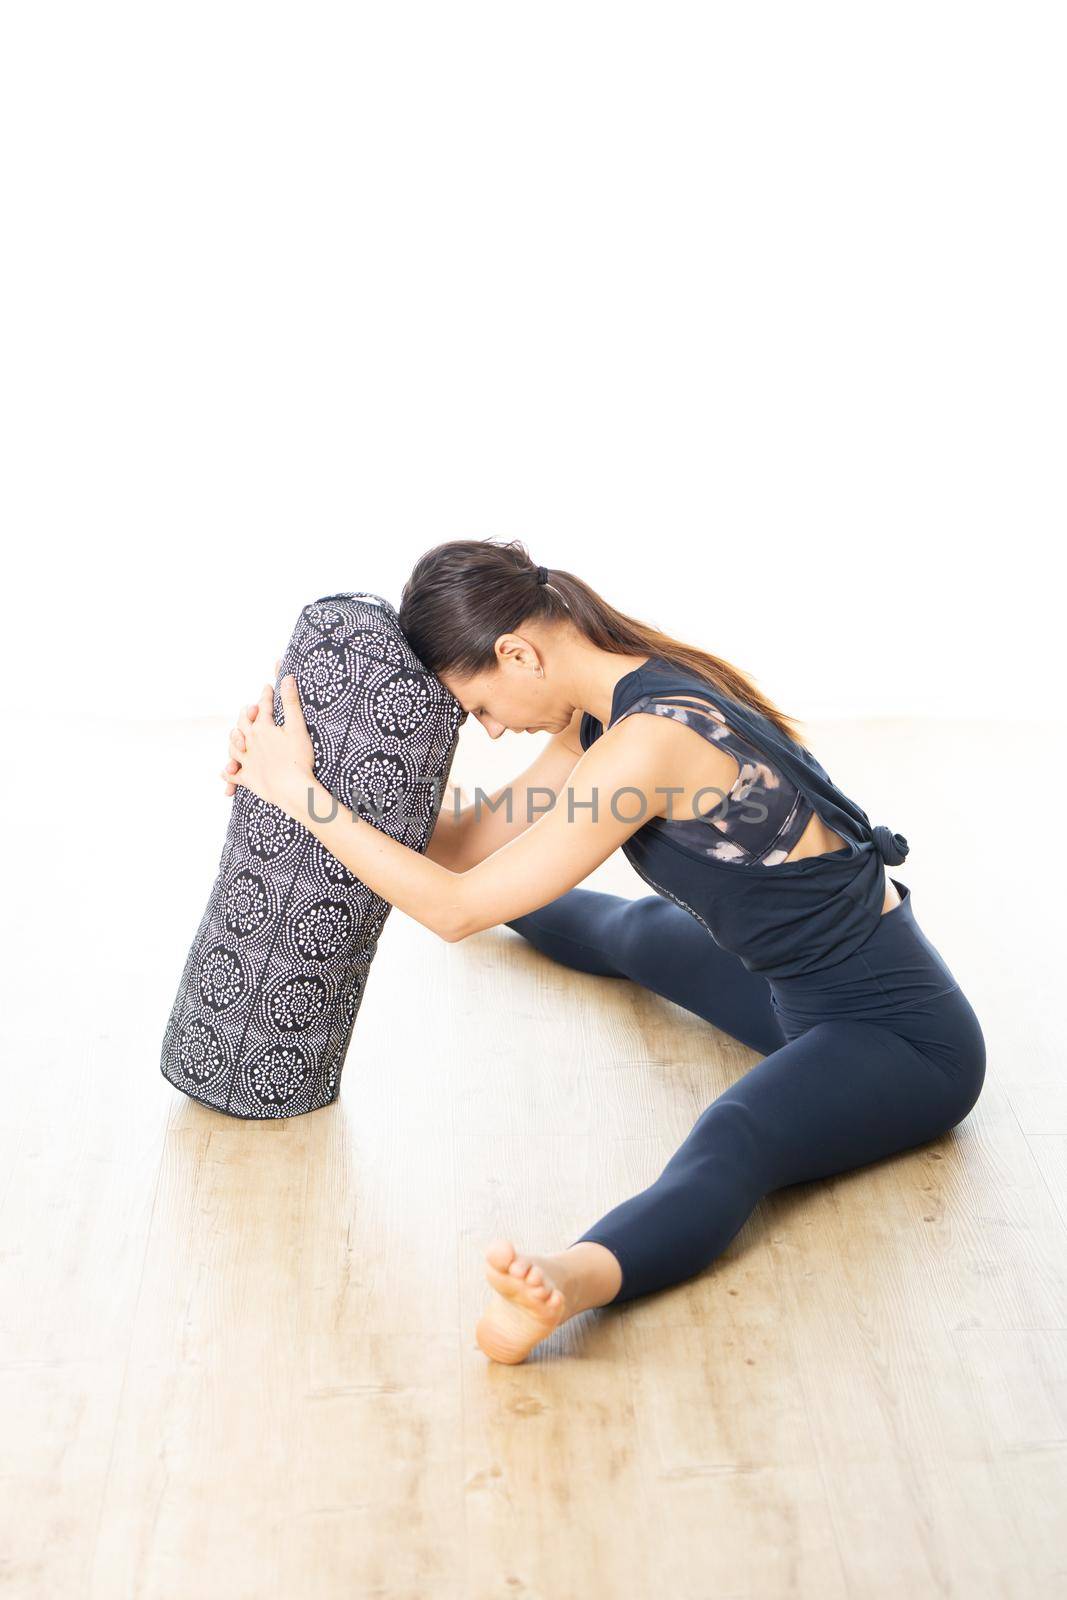 Restorative yoga with a bolster. Young sporty attractive woman in bright white yoga studio, lying on bolster cushion, stretching and relaxing during restorative yoga. Healthy active lifestyle.